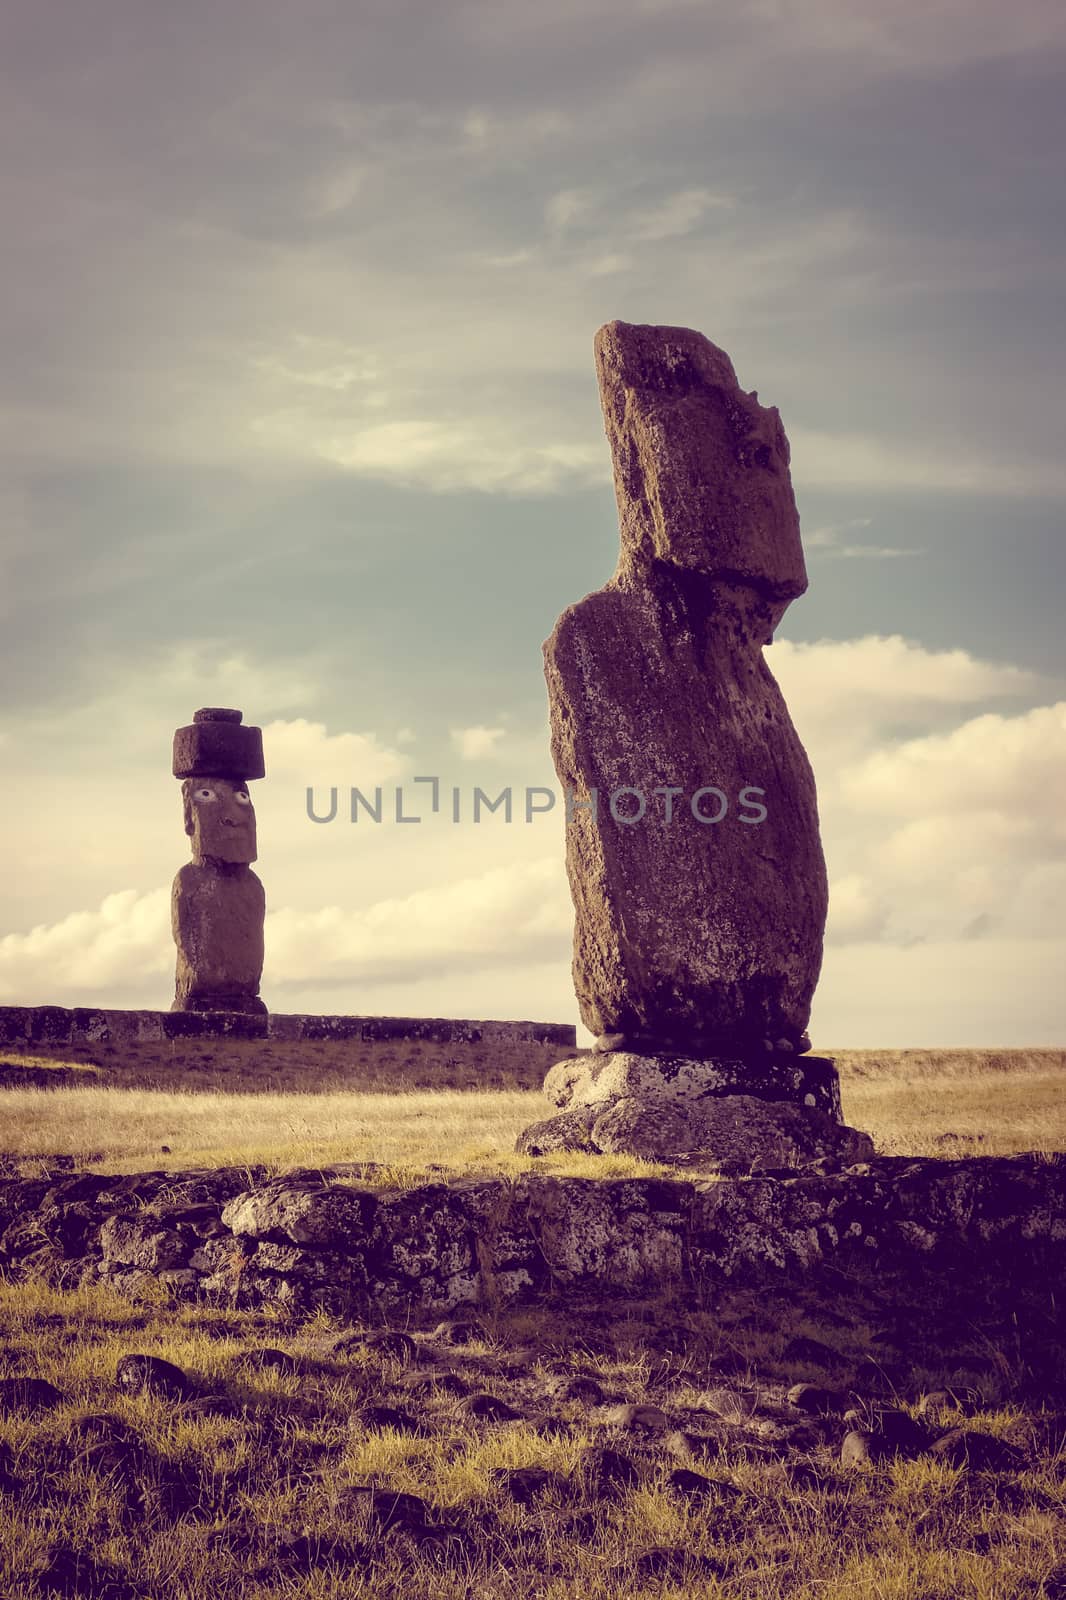 Moais statues, vai ure, easter island, Chile